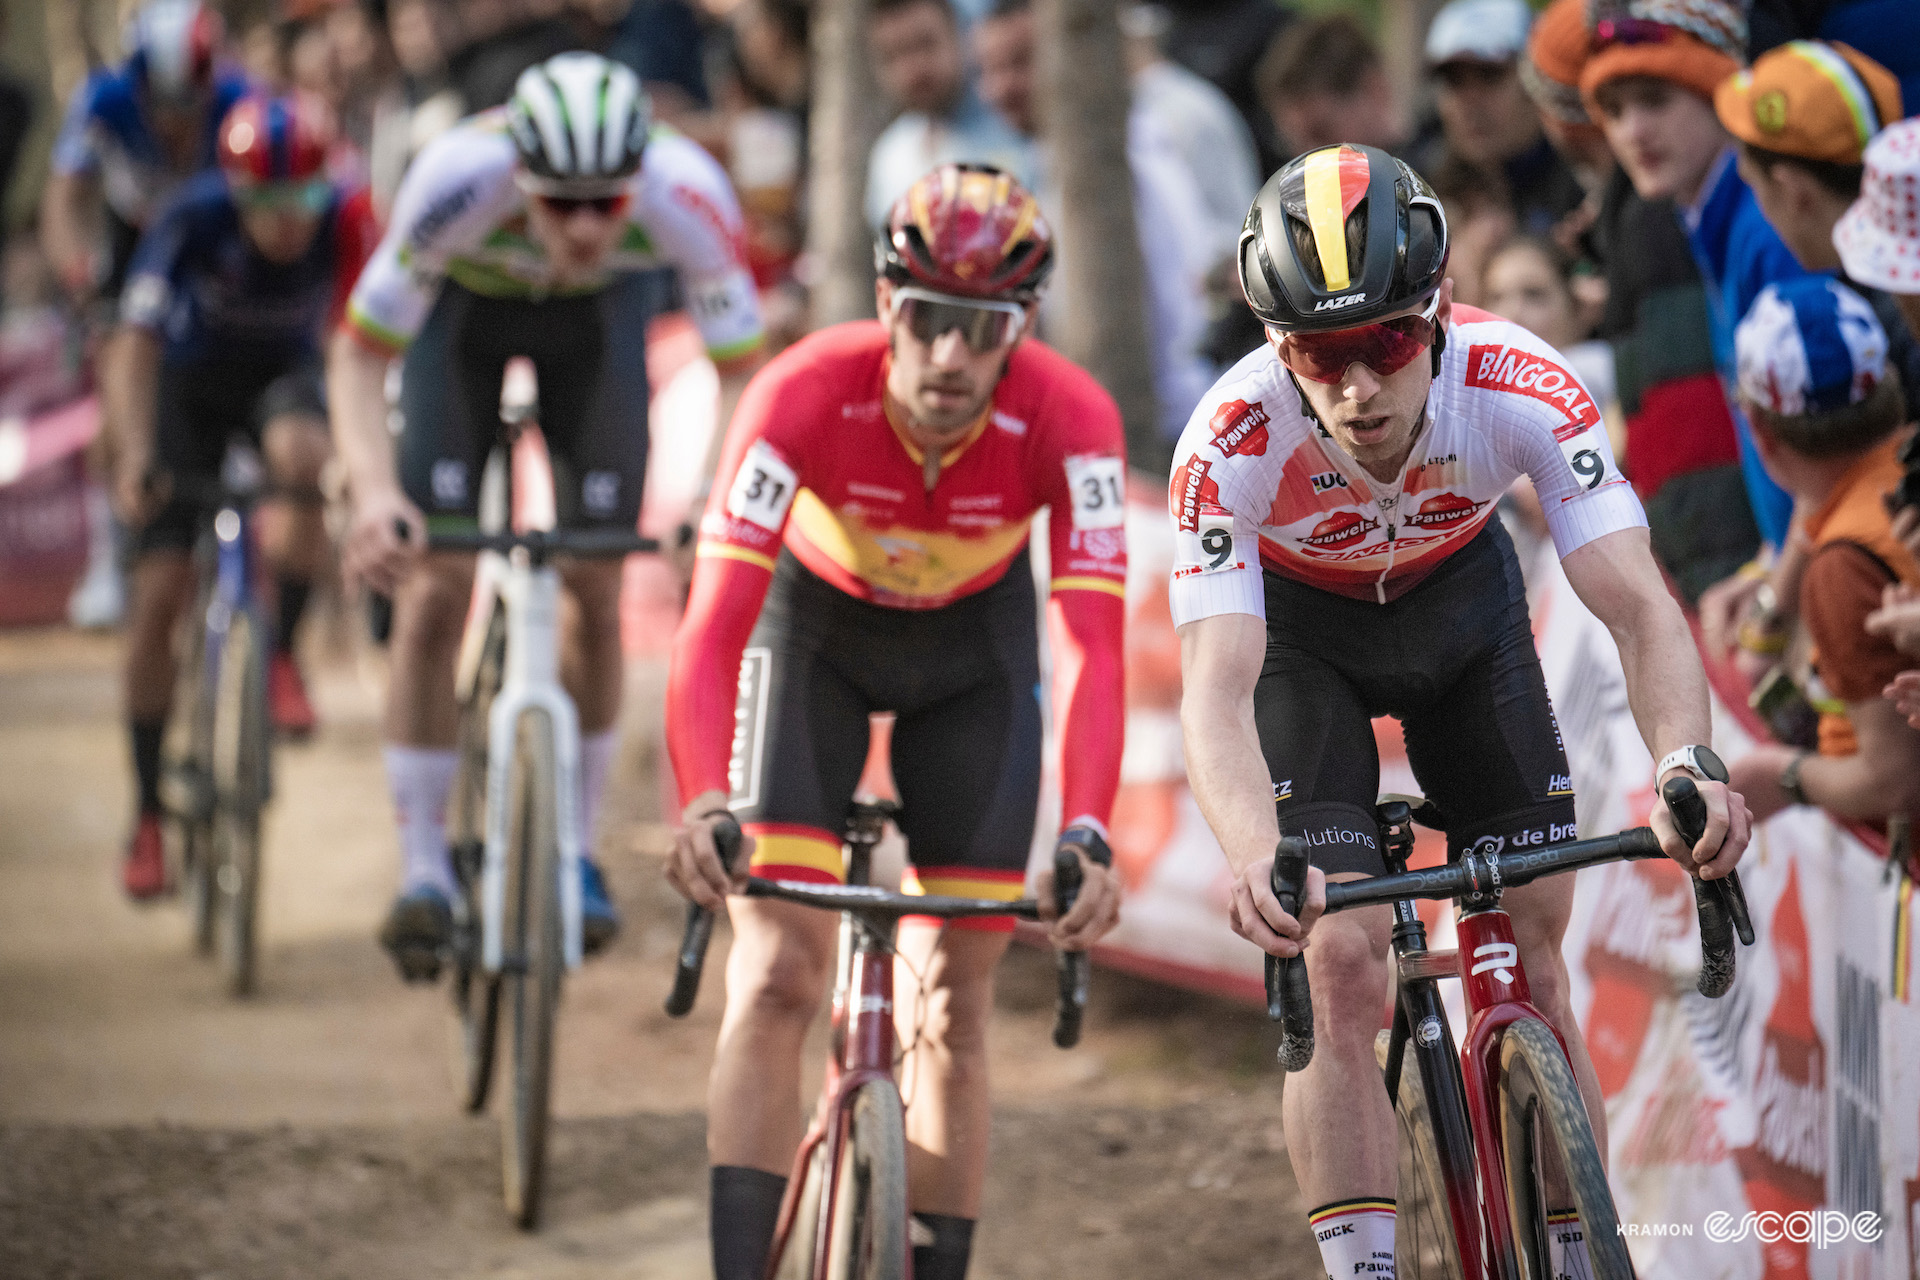 World Cup leader Eli Iserbyt and Spanish national champion Felipe Orts during CX World Cup Benidorm.